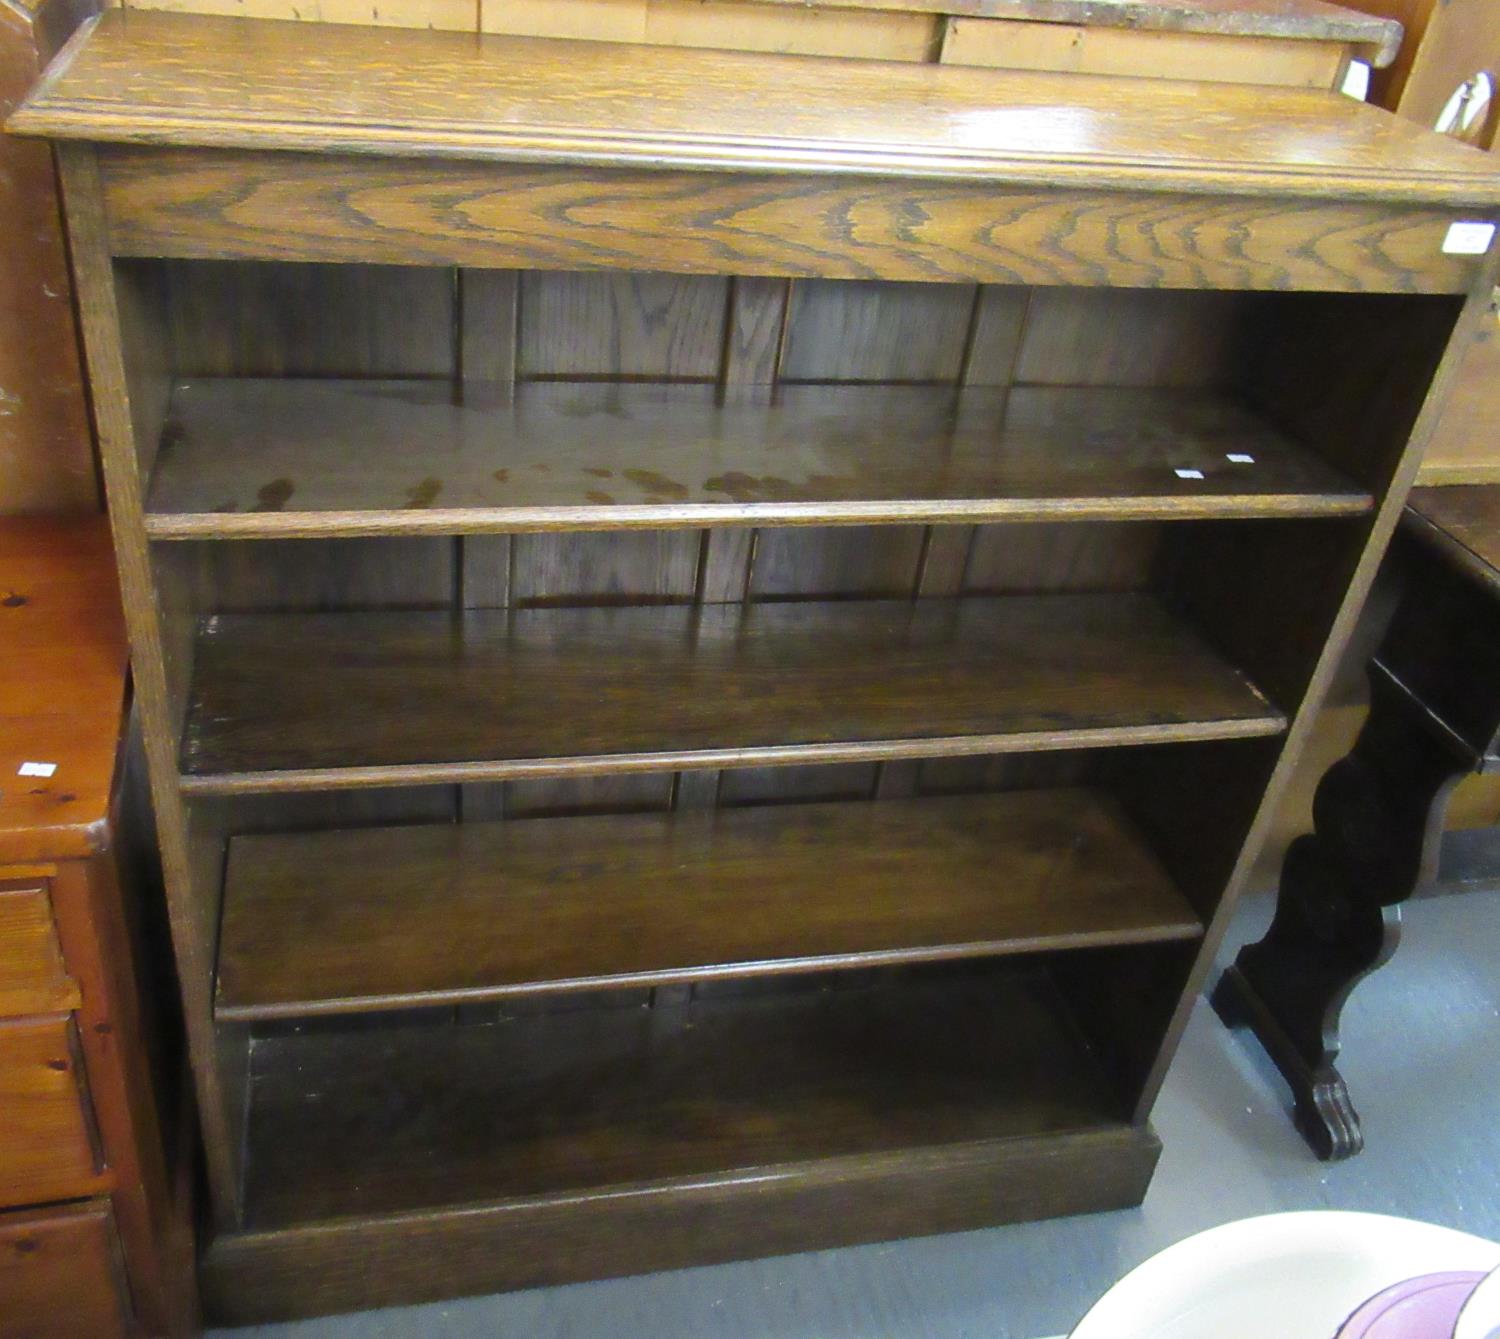 Early 20th century oak open bookcase with adjustable shelves. (B.P. 21% + VAT)